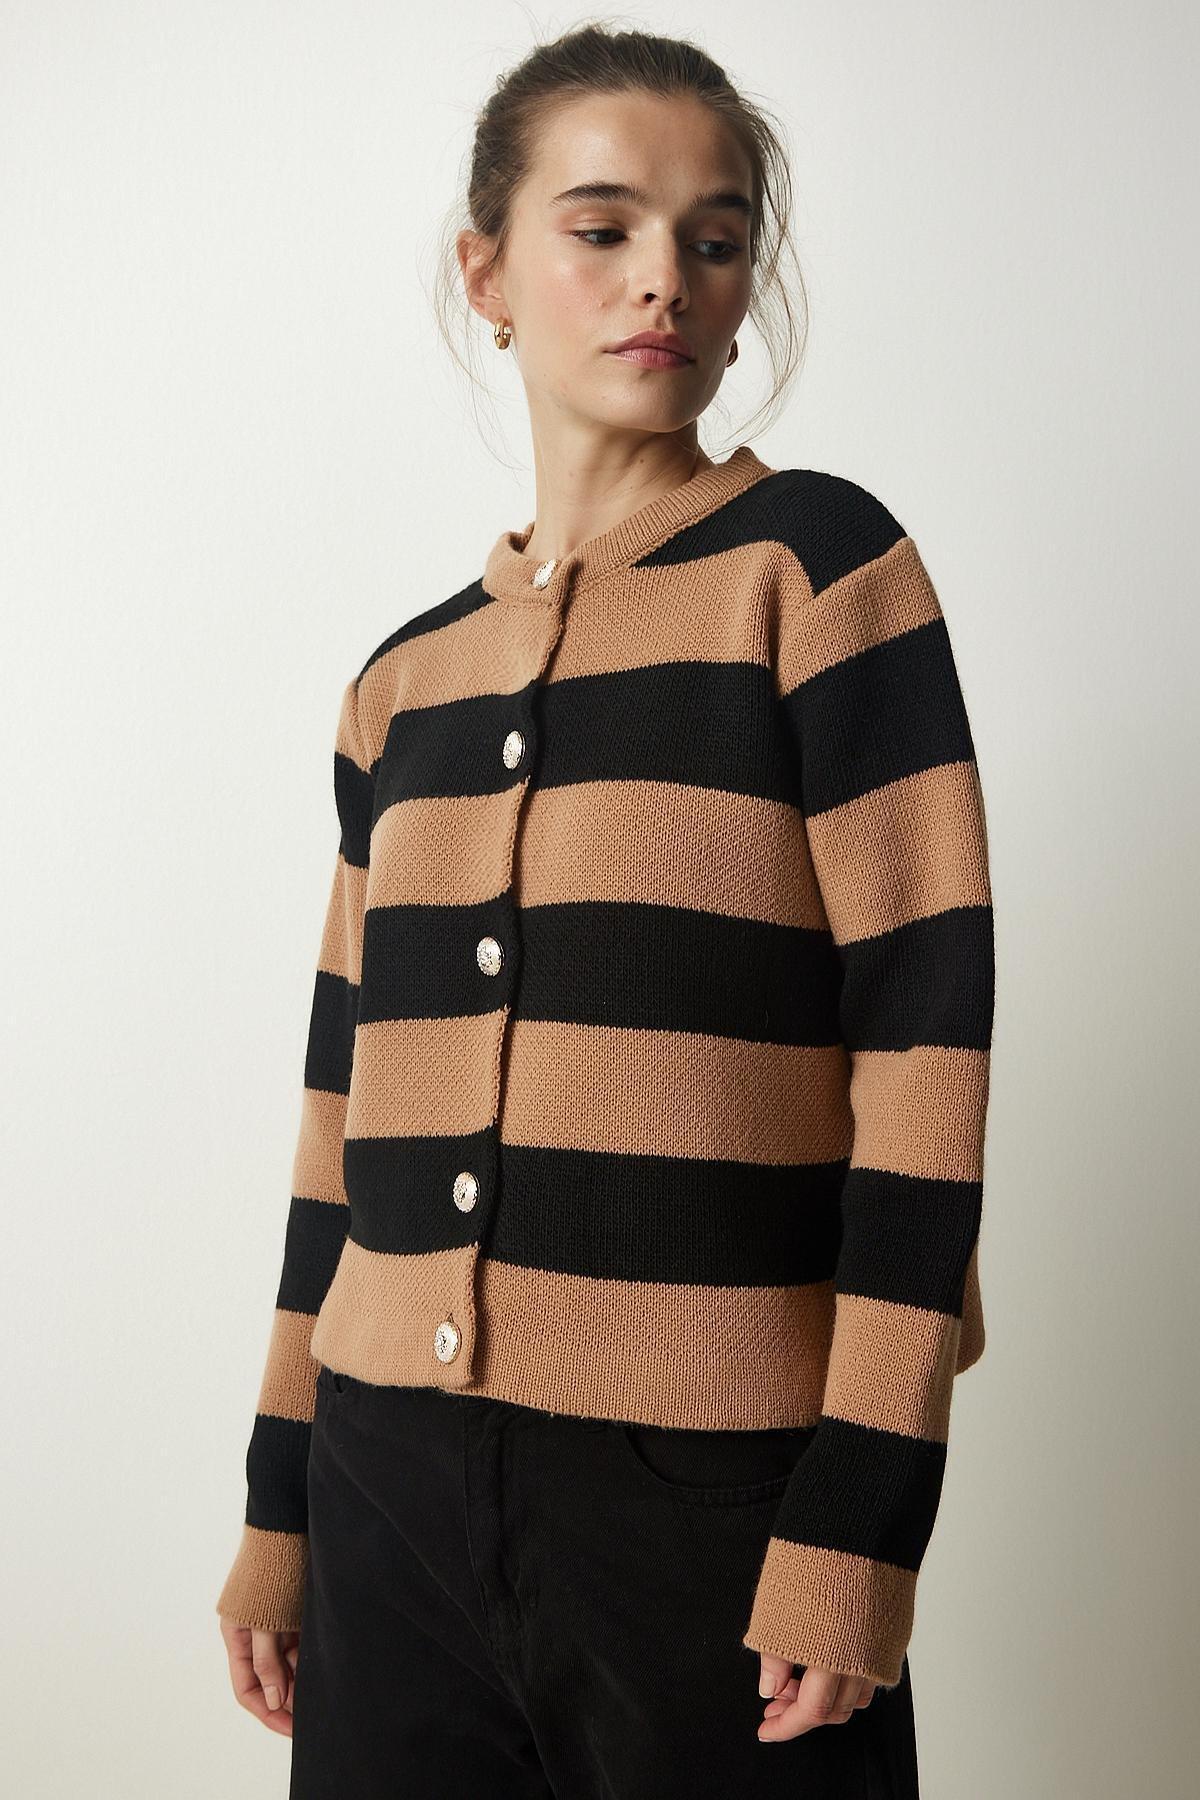 Happiness Istanbul - Black Buttoned Striped Knitwear Cardigan